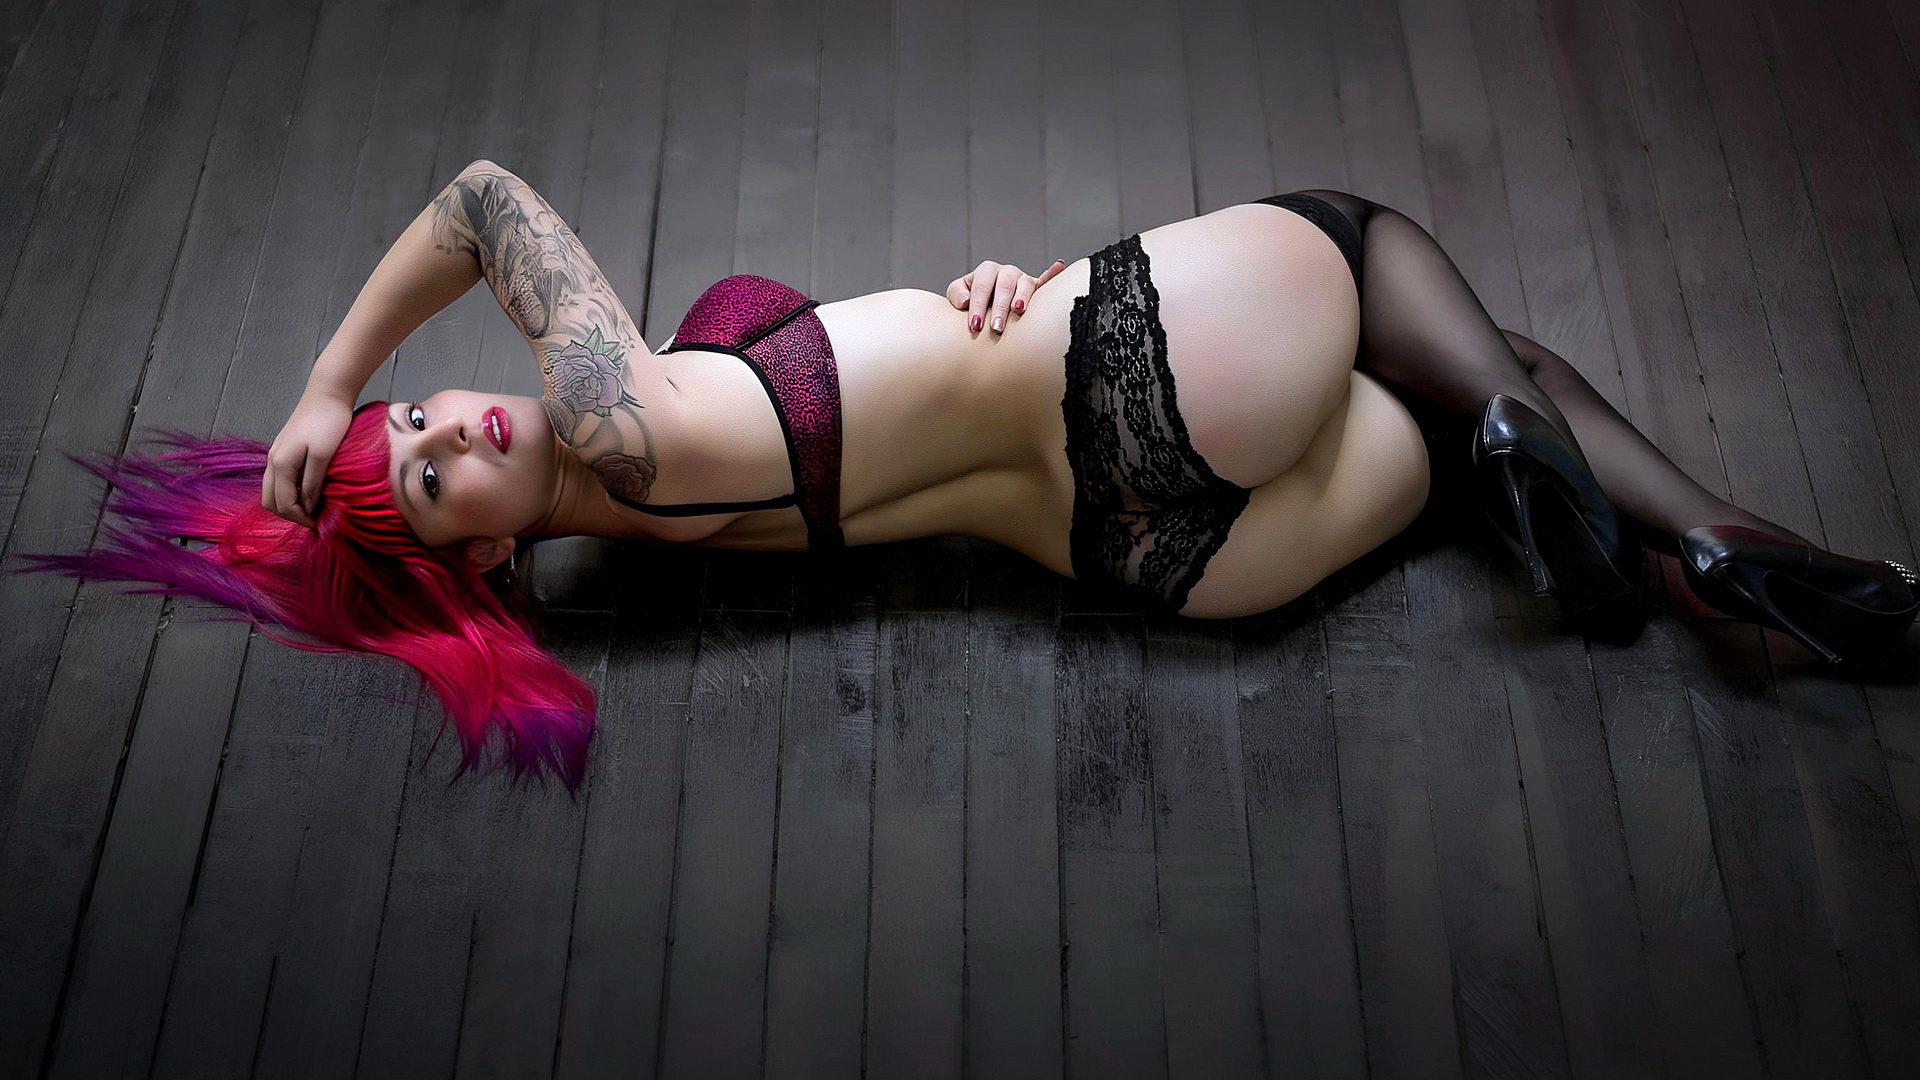 A girl with red hair and underwear lies on the floor